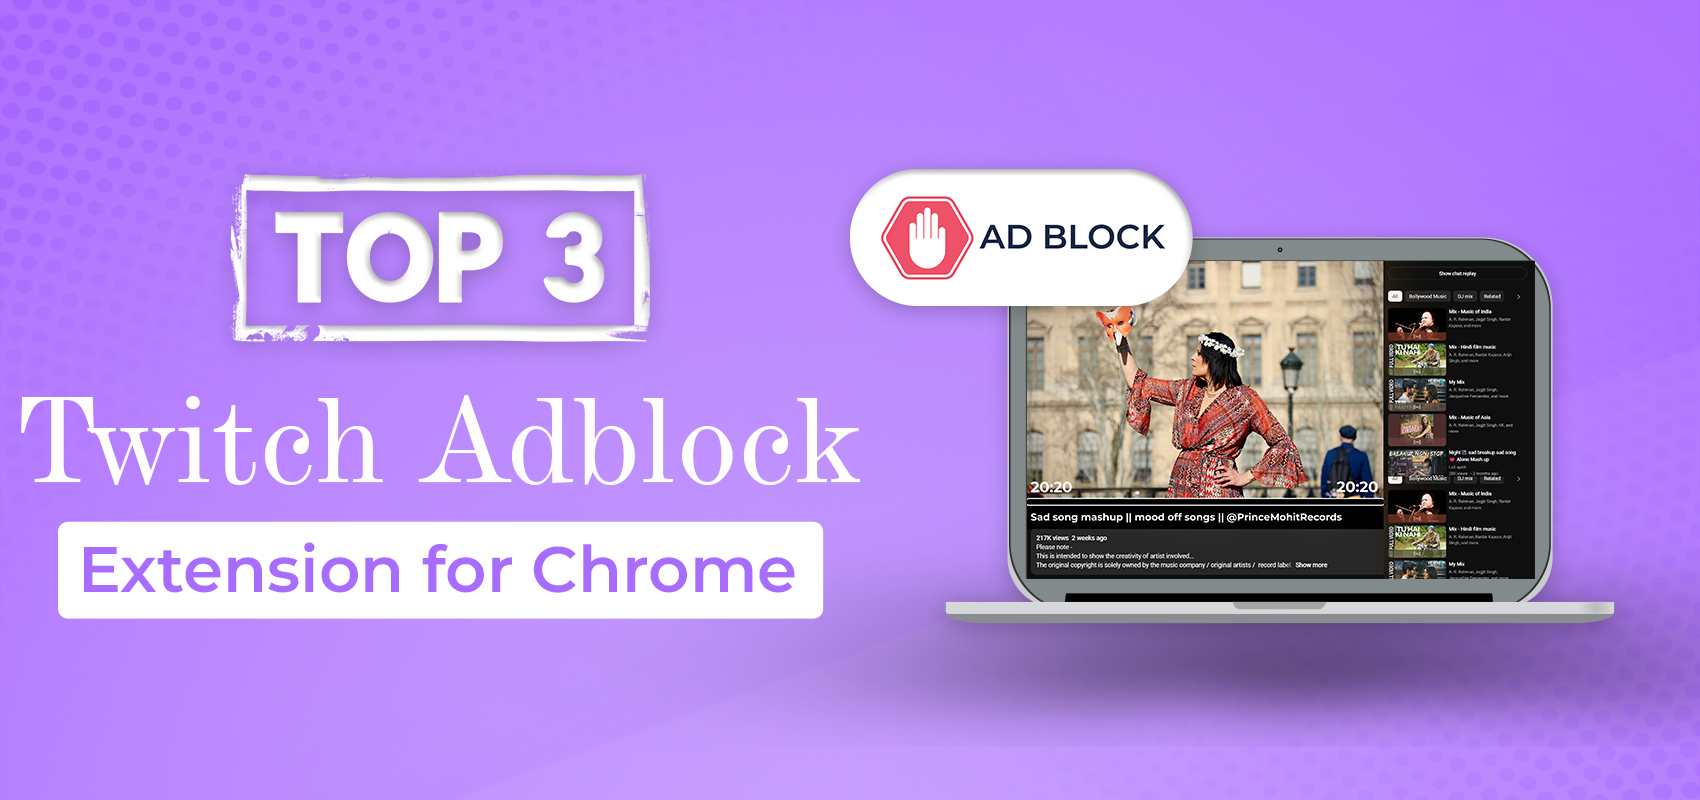 twitch adblock extension for chrome